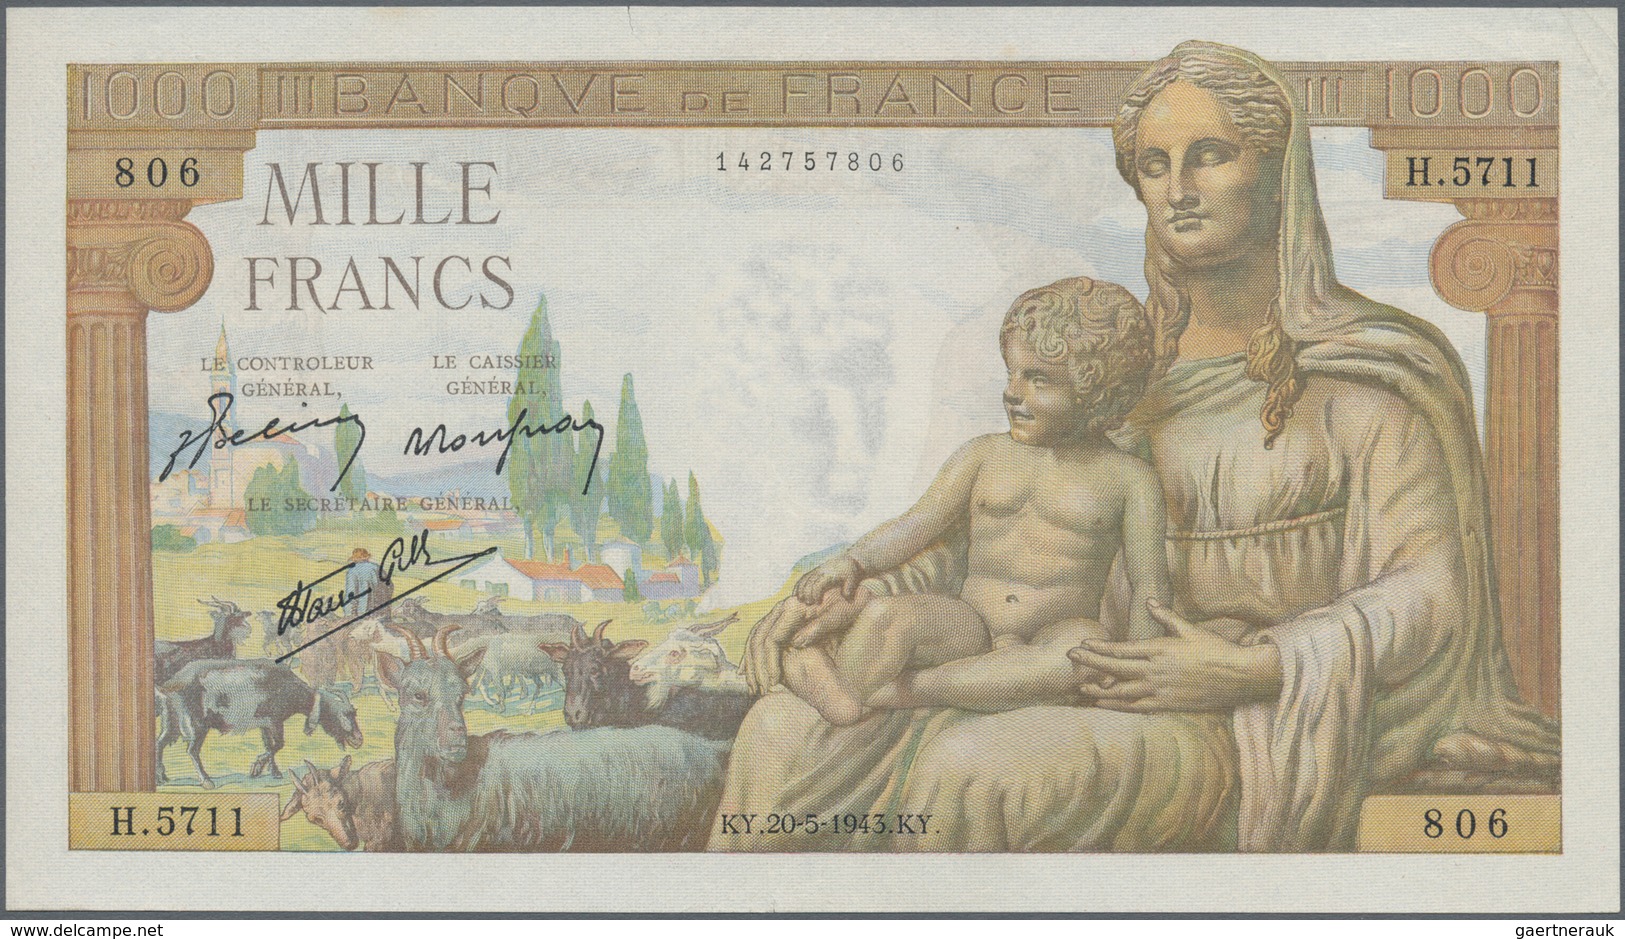 France / Frankreich: large lot of 143 banknotes from Banque de France containing the following Pick